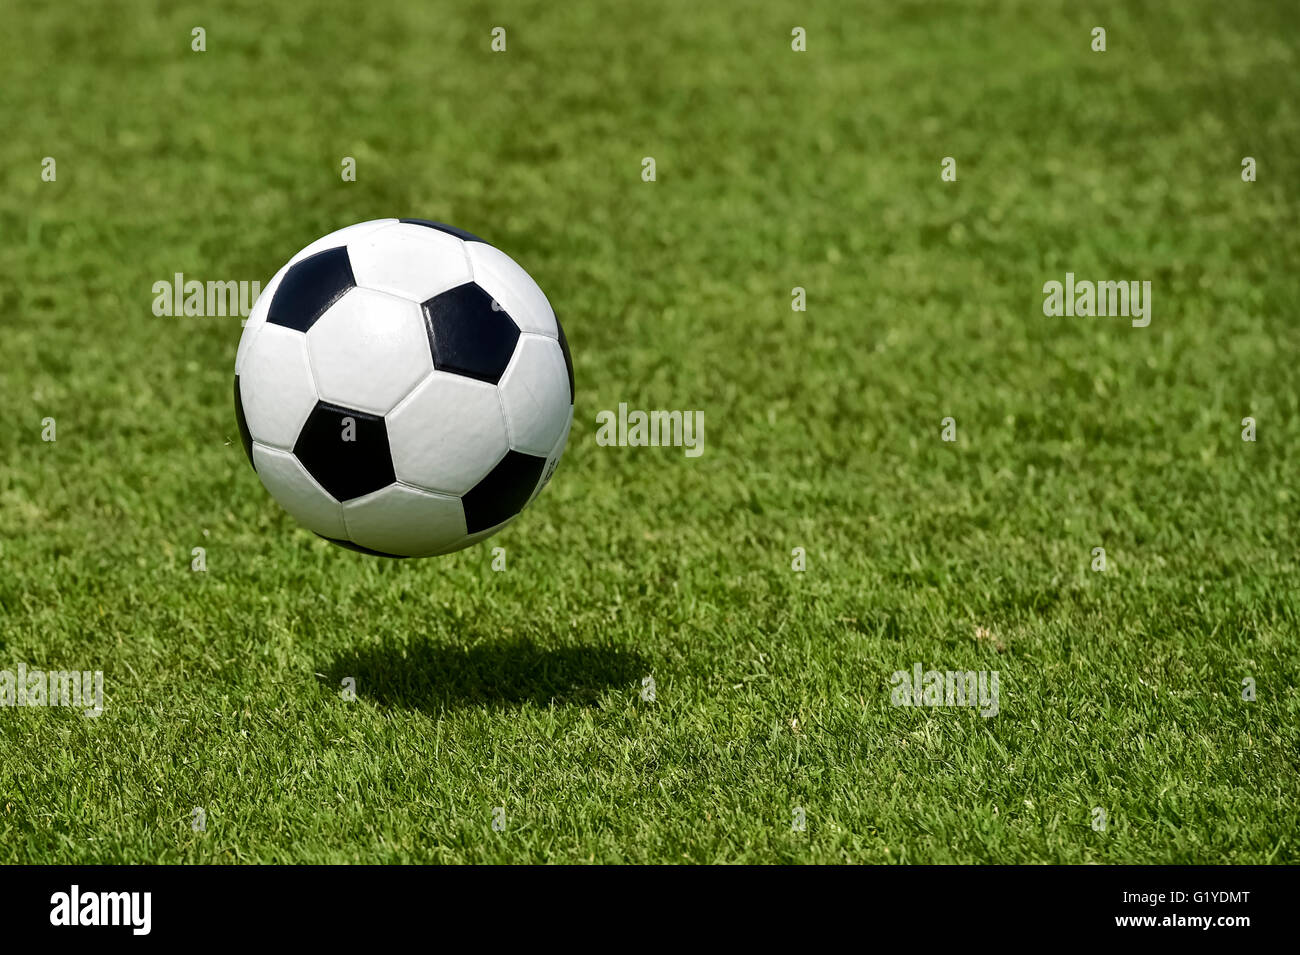 Wiping pattern black white soccer, leather ball and grass Stock Photo